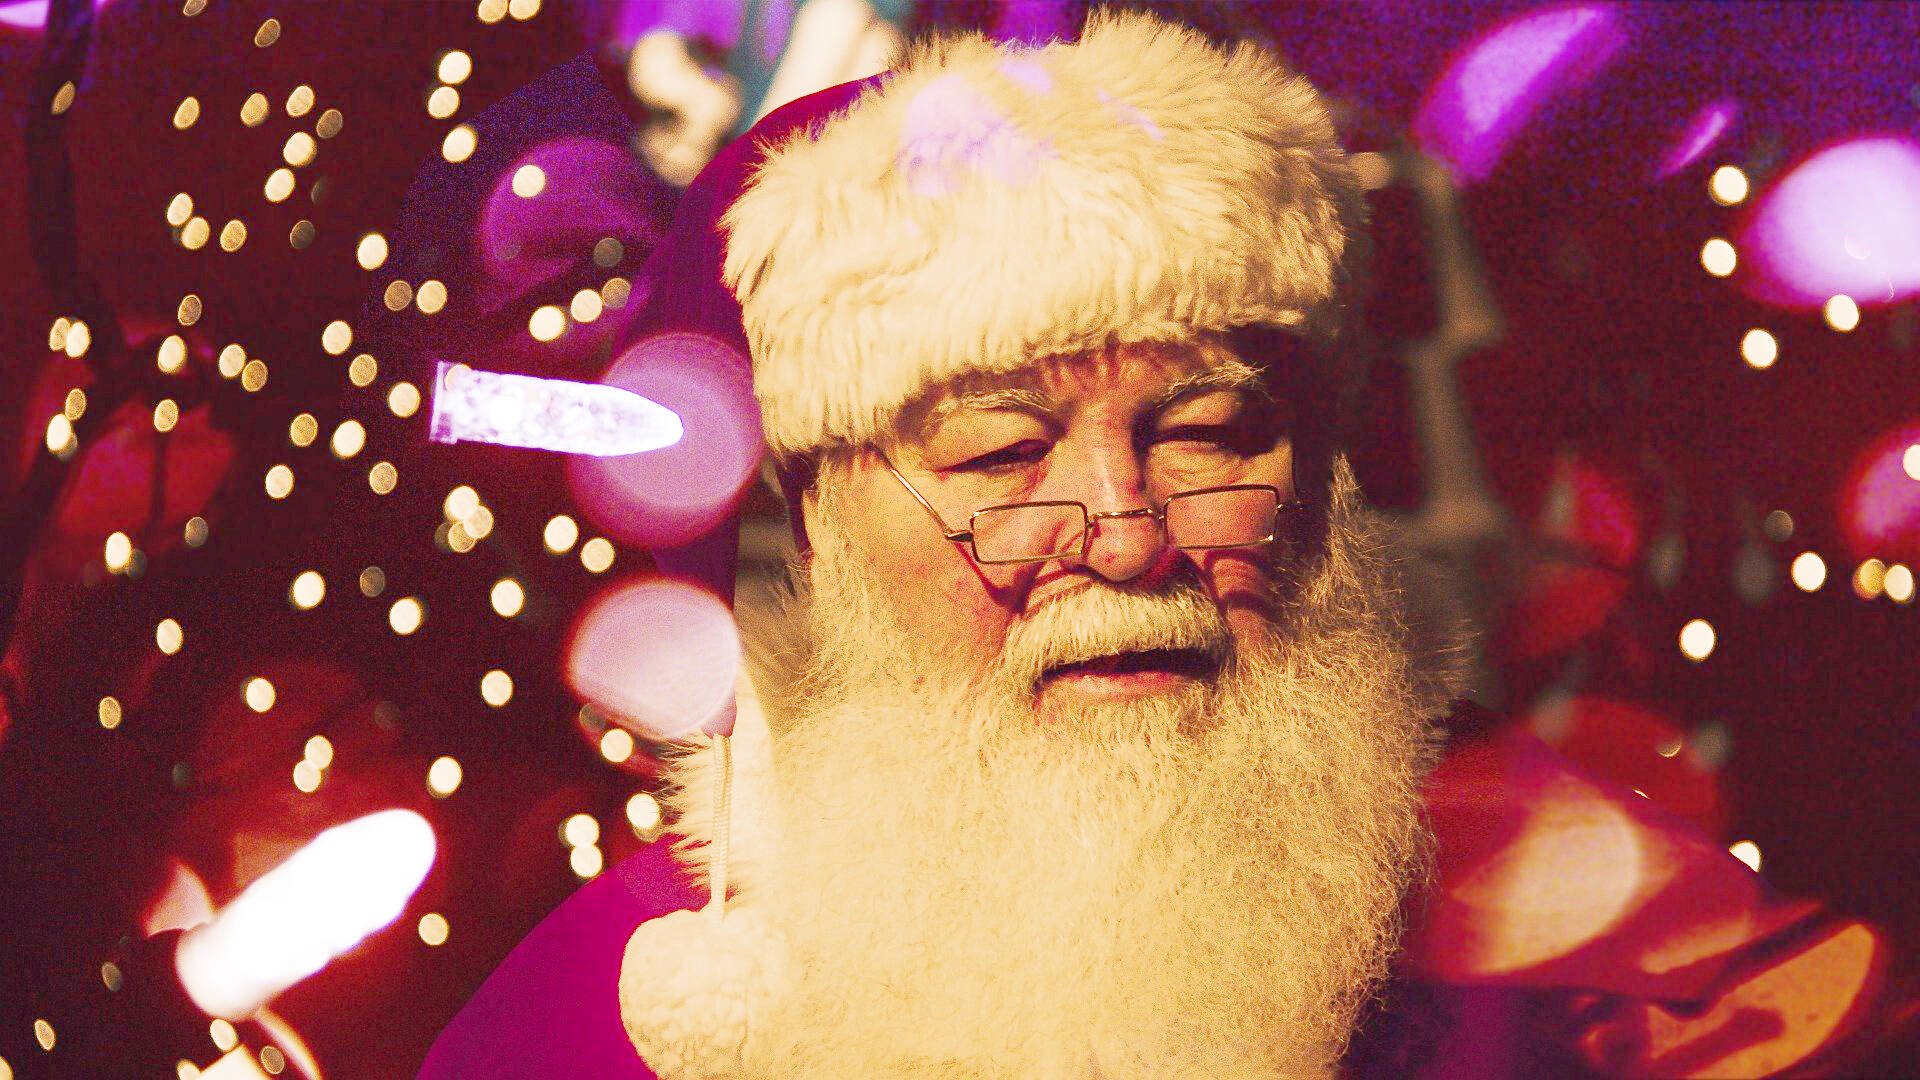 Santa Claus can be seen in many places at this time of year. (Pixabay.com)